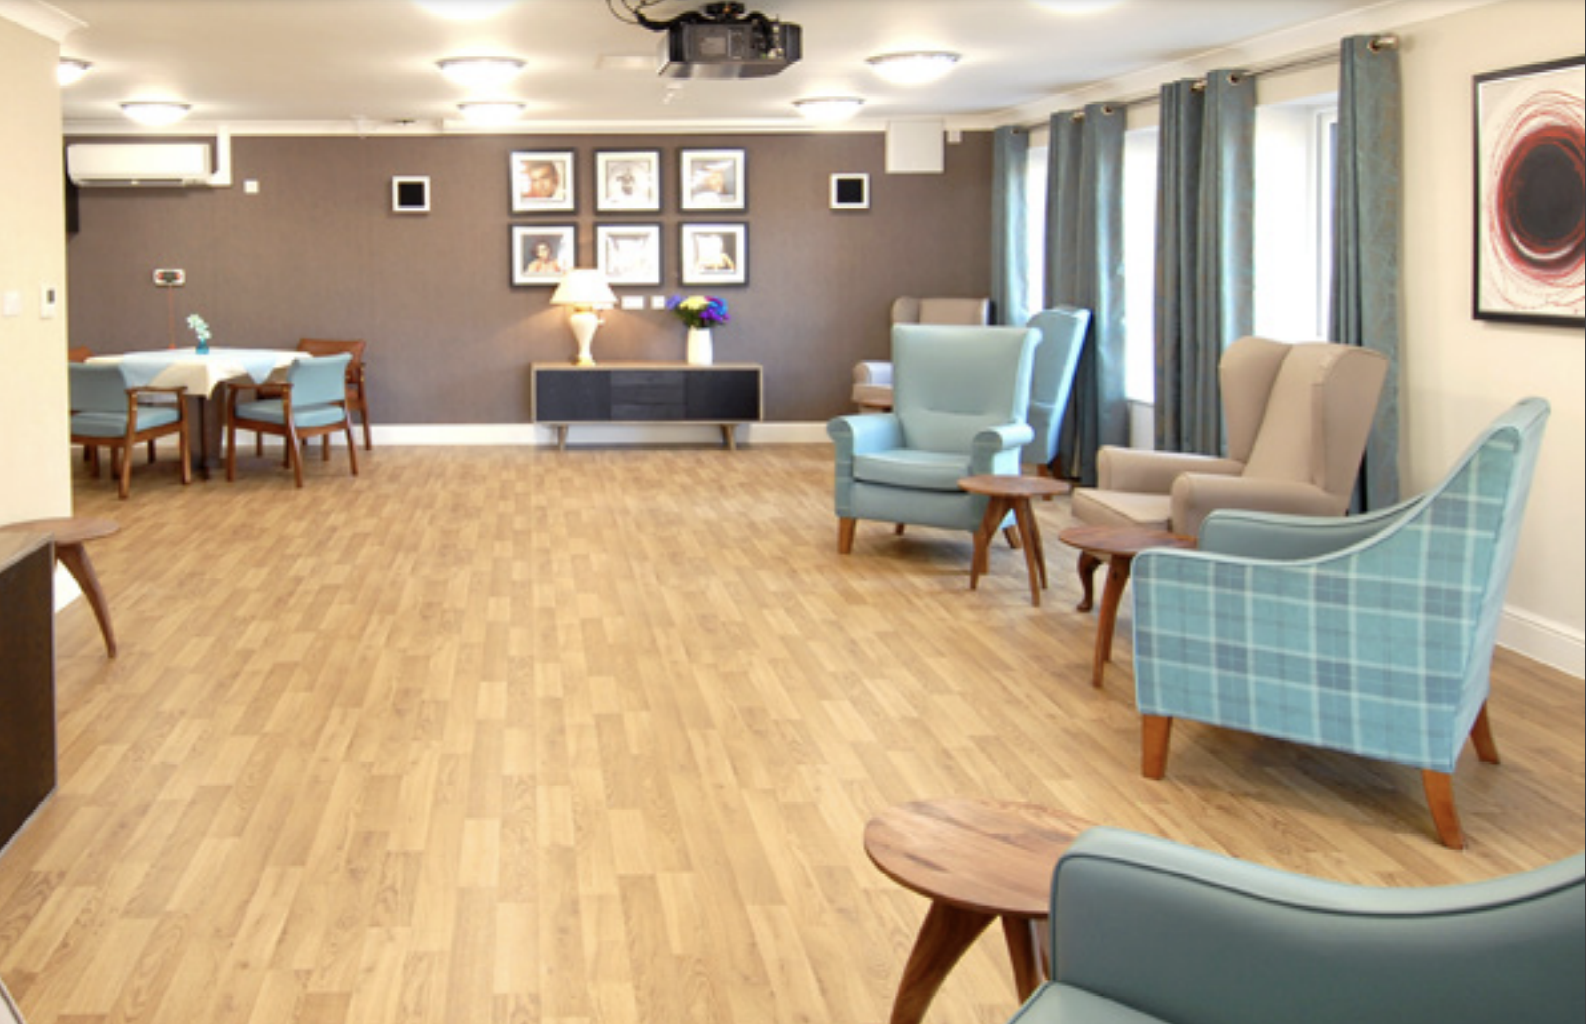 The communal area at Westhaven Care Home in Wirral, Merseyside